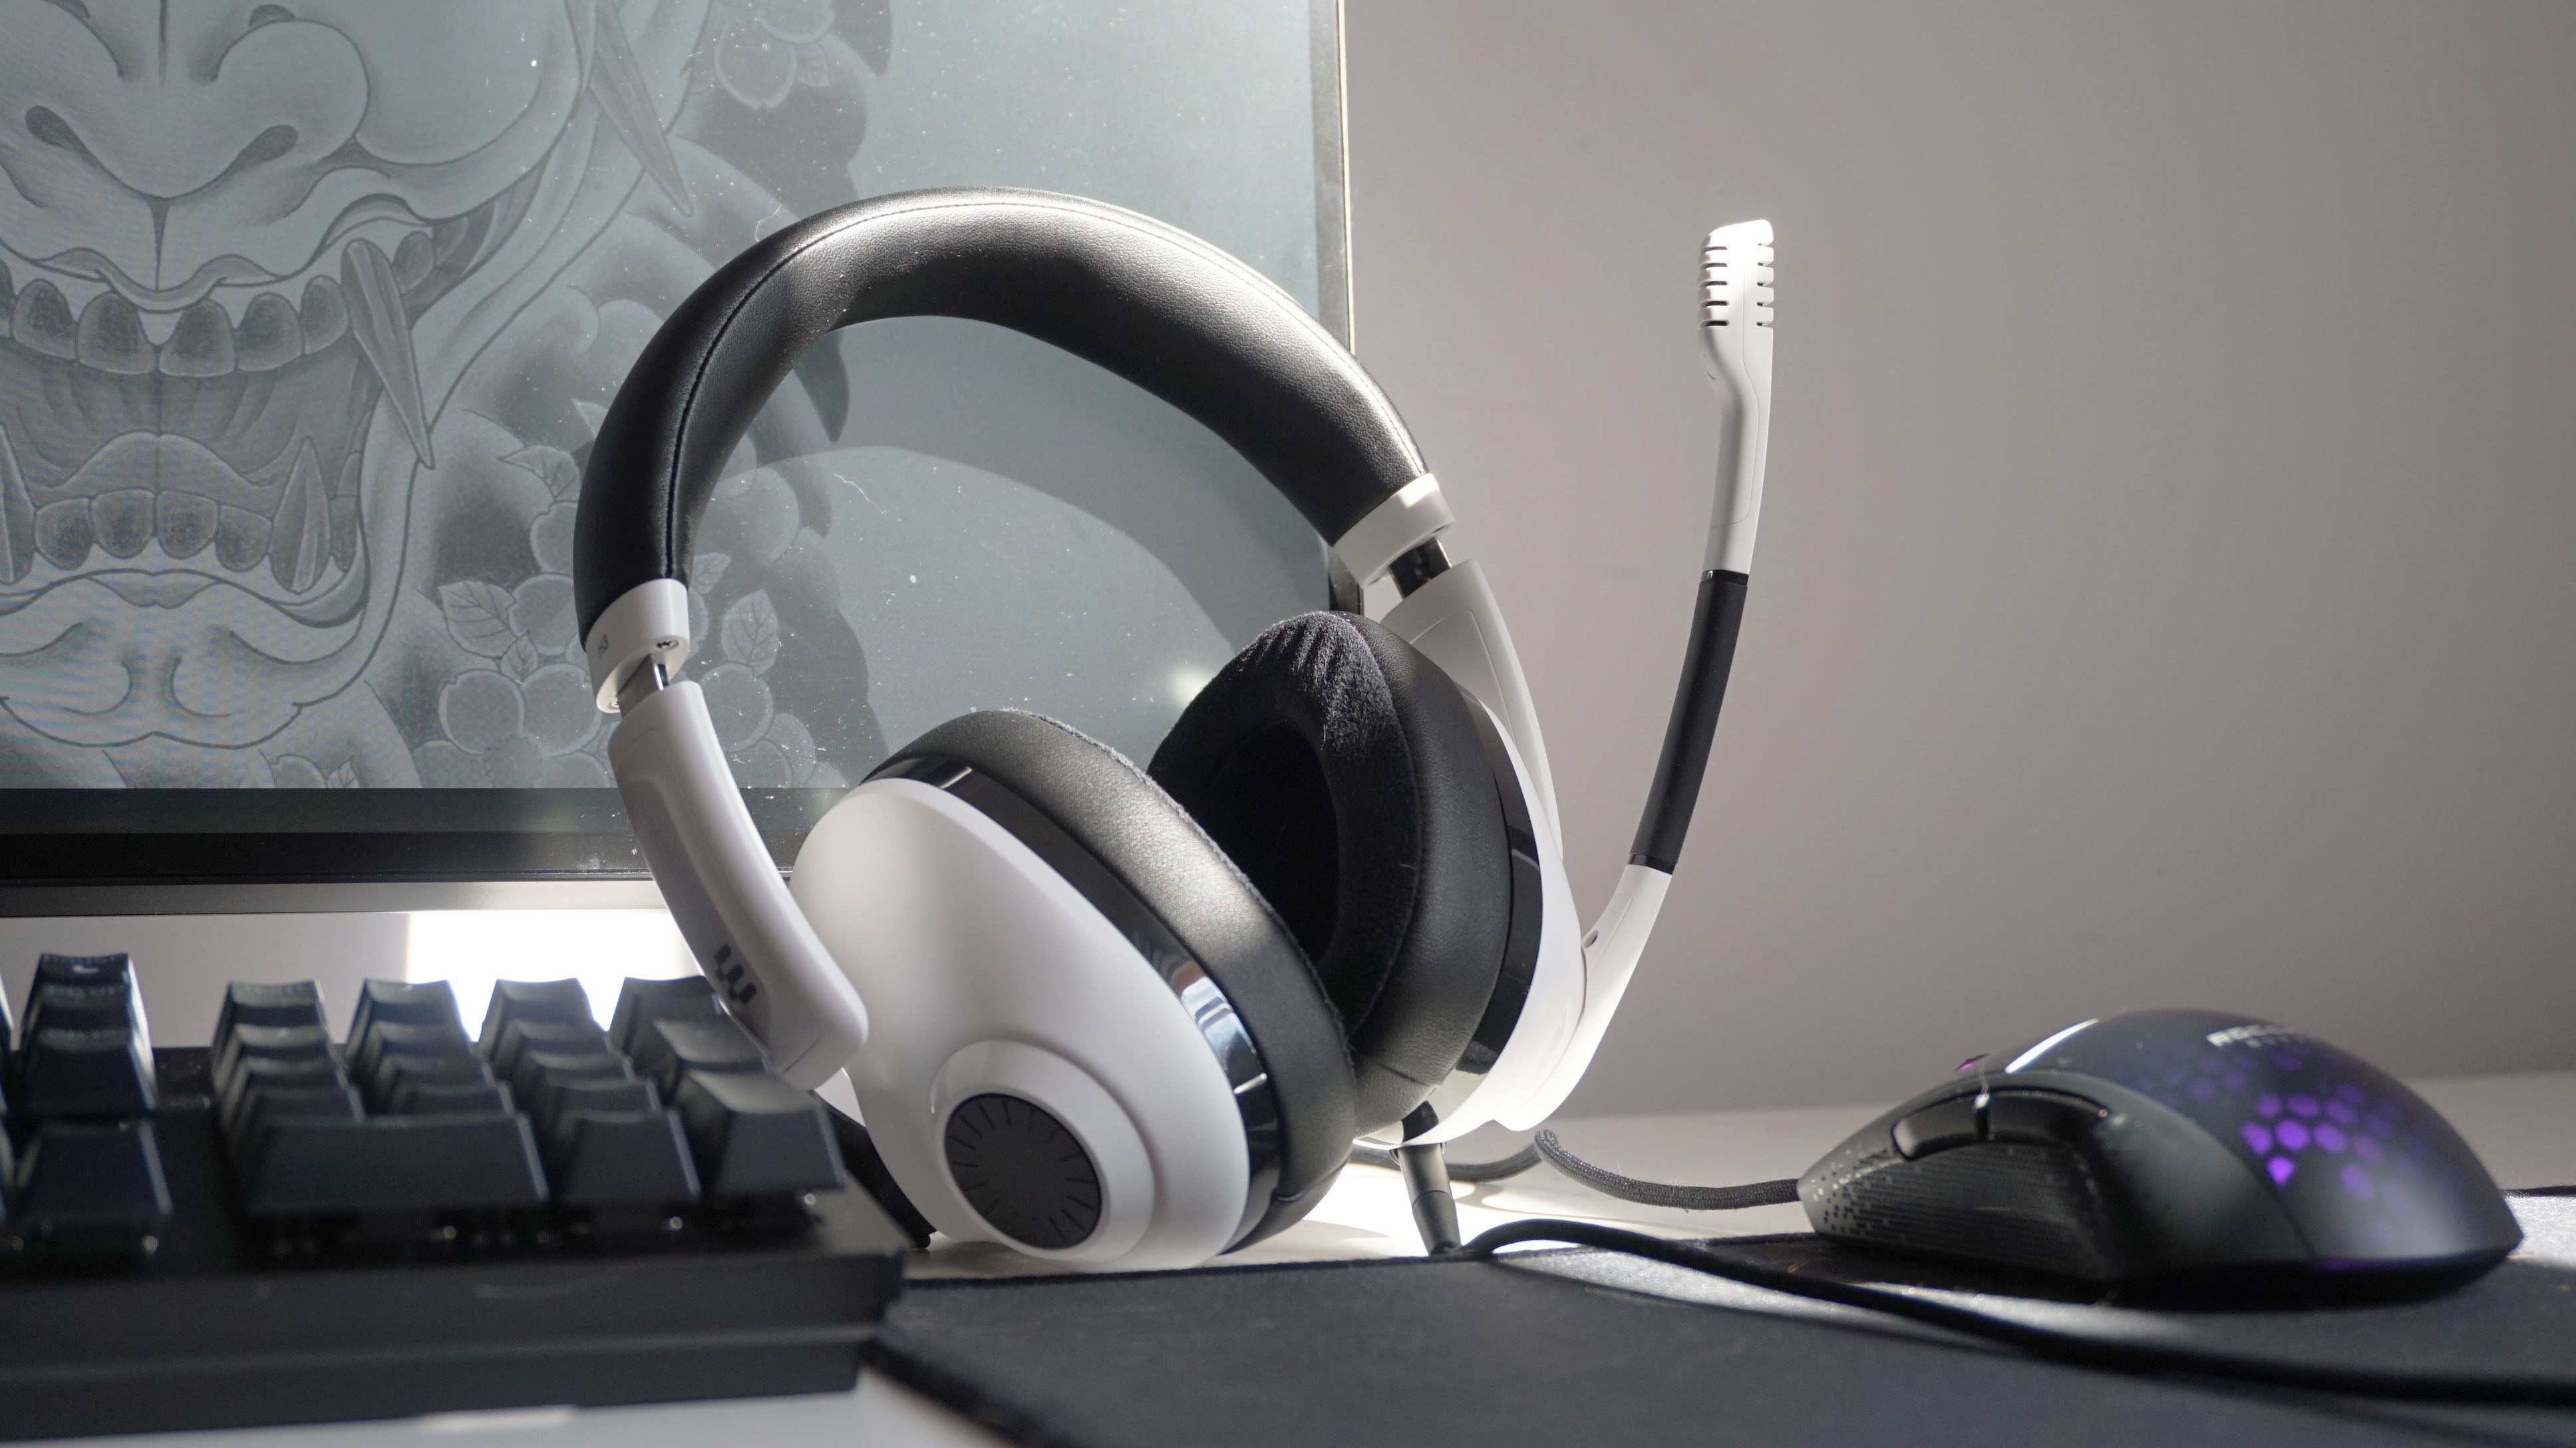 The EPOS H3 gaming headset on a desk next to a keyboard, mouse and monitor